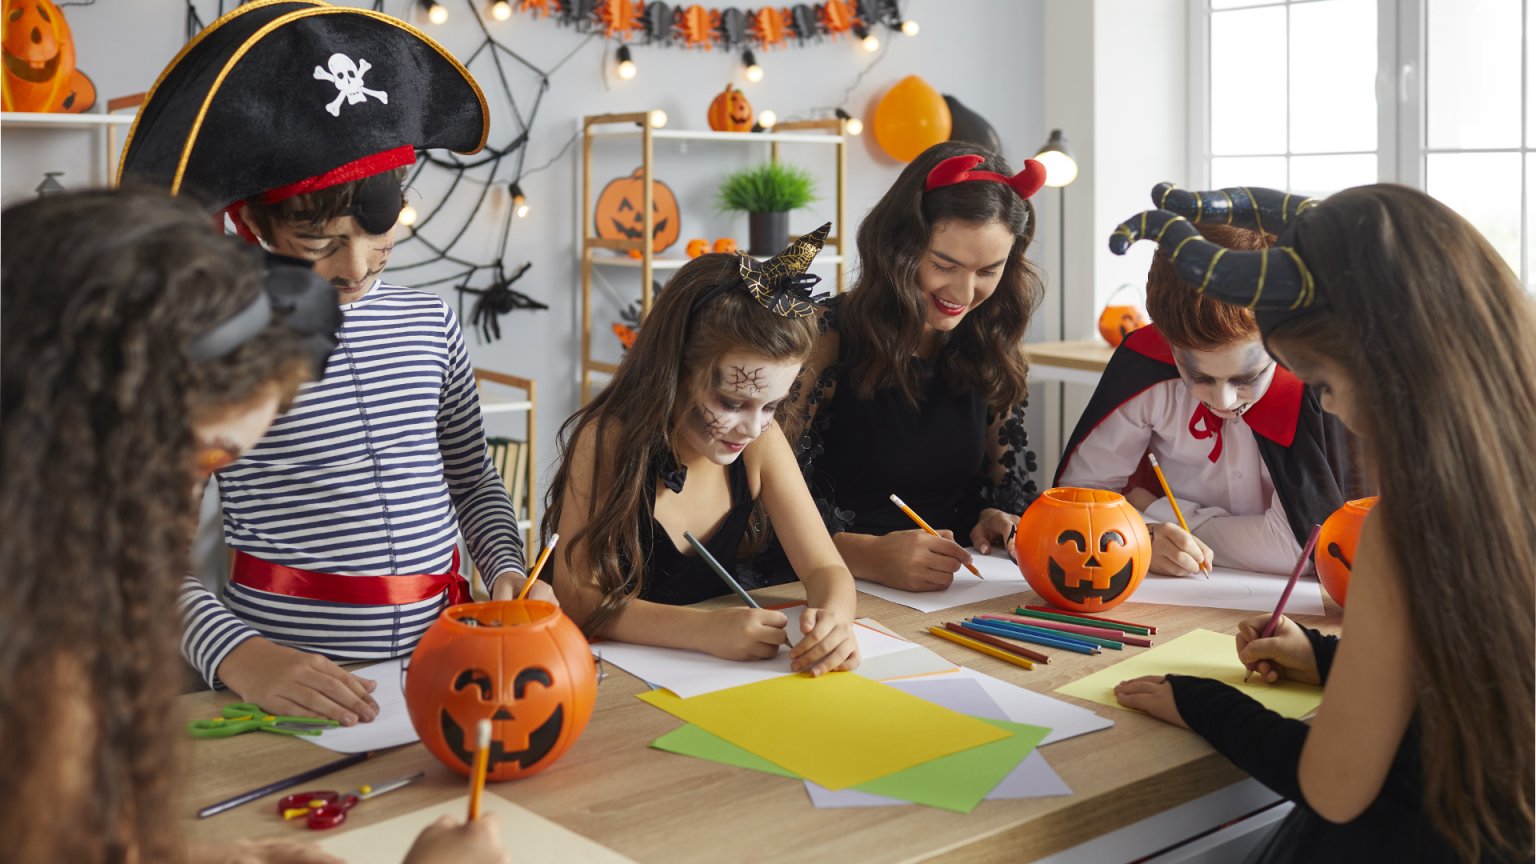 7 Halloween Half-Term Activities, As Recommended By An Education Expert - LUXlife Magazine